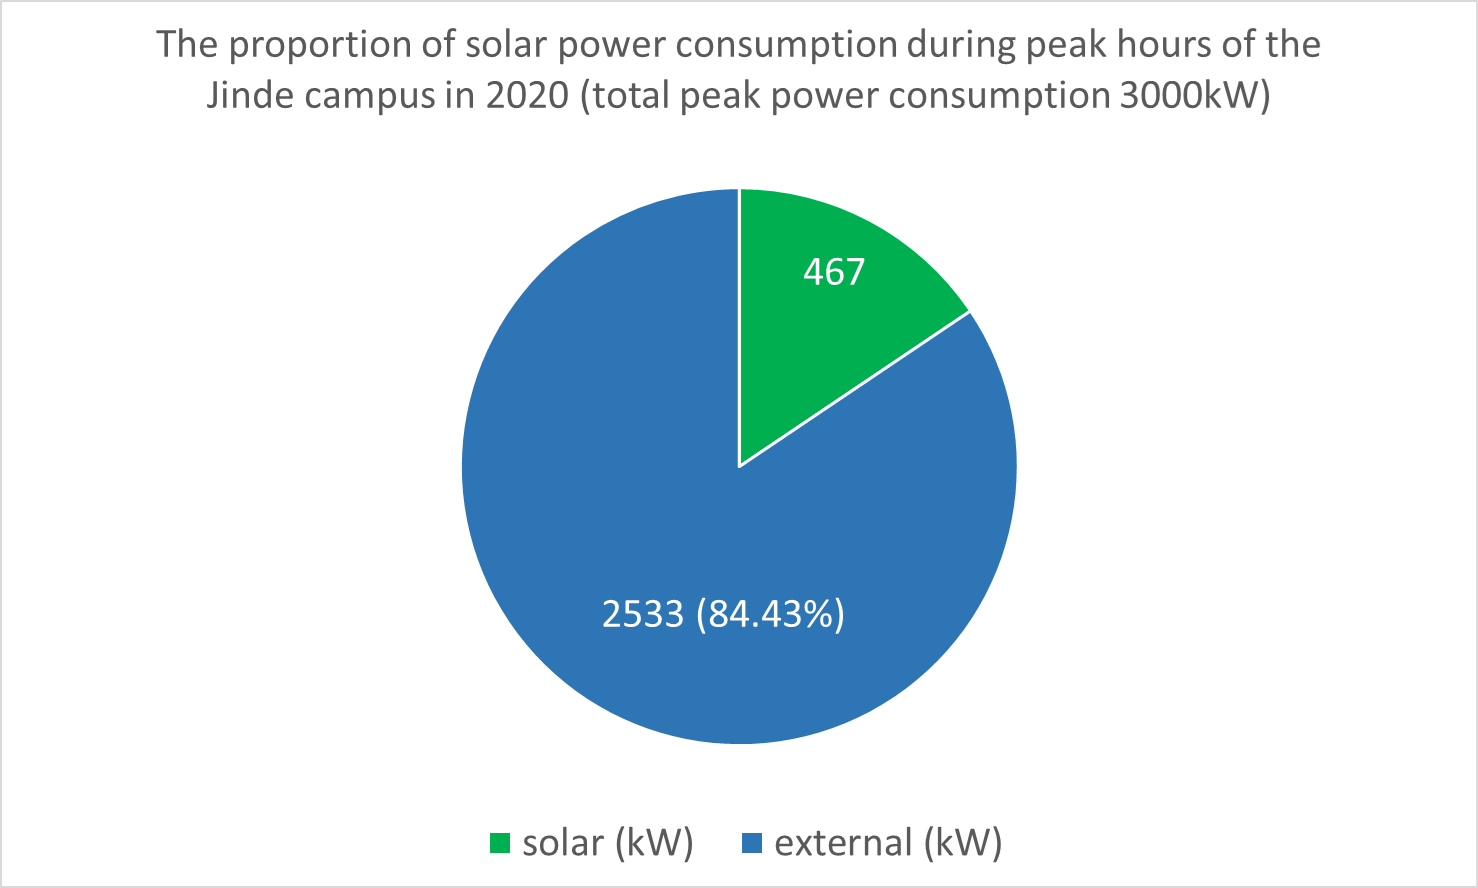 Figure 1. The proportion of solar power consumption during peak hours of the Jinde campus in 2020